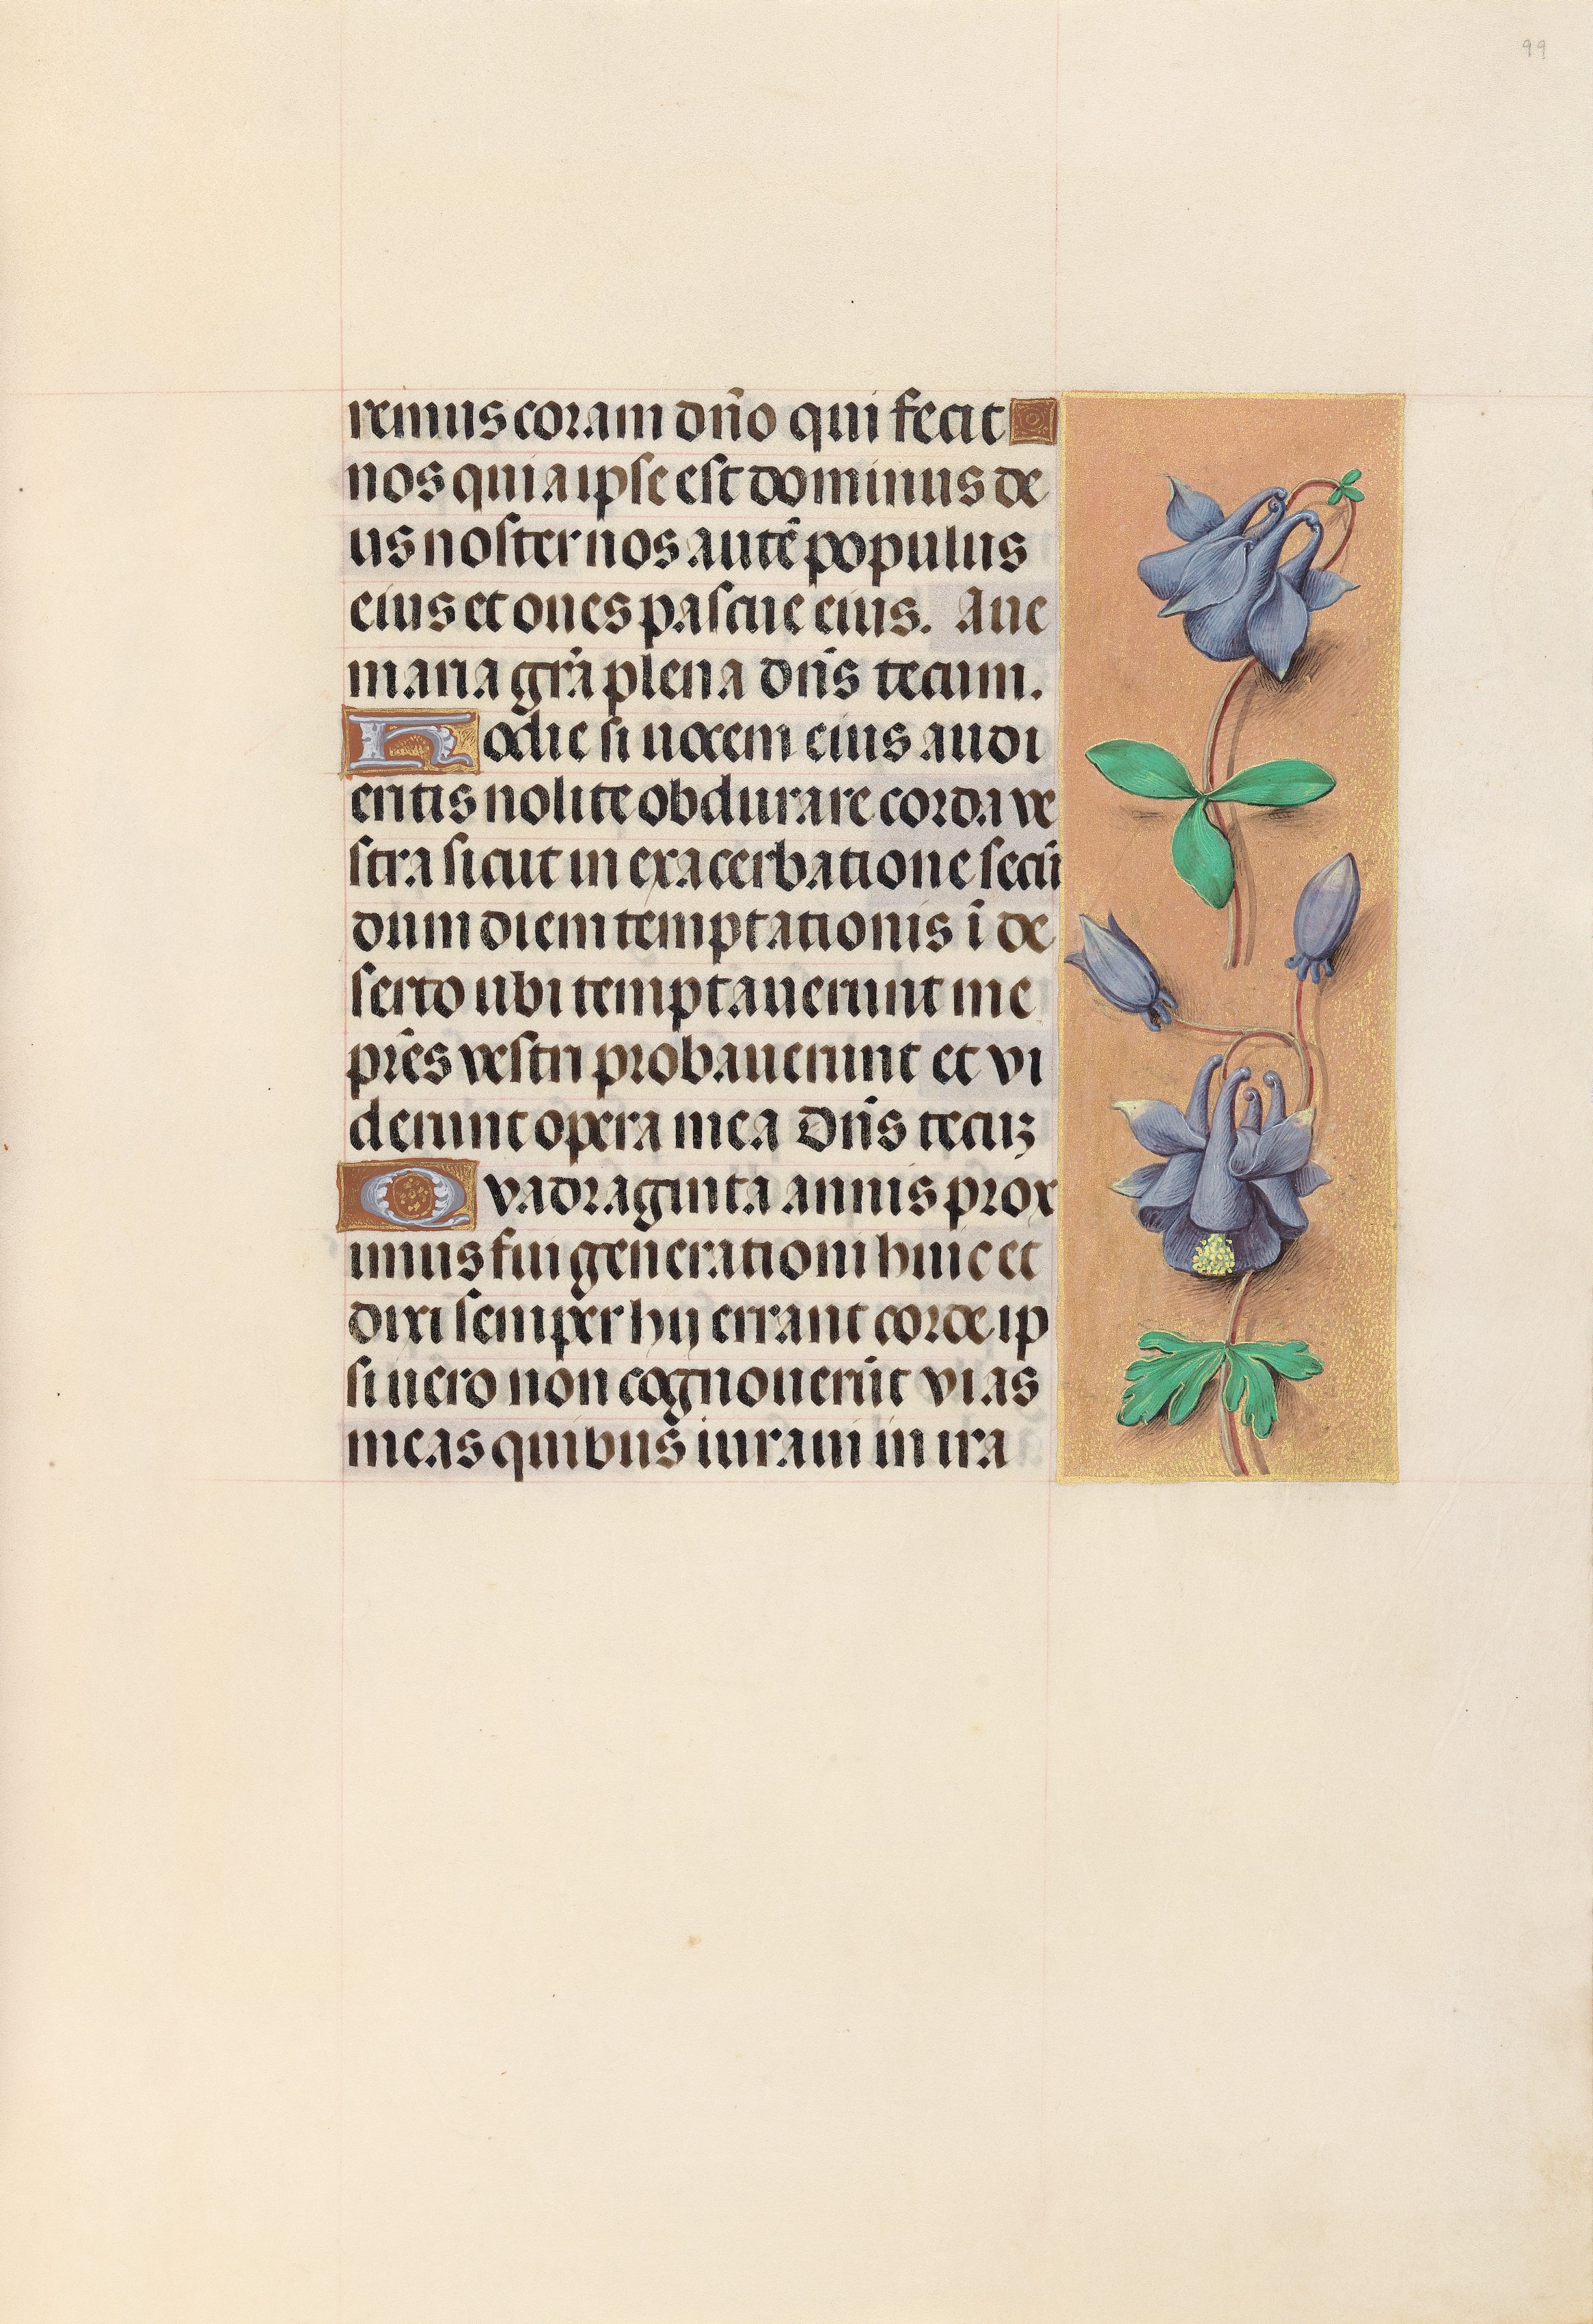 Hours of Queen Isabella the Catholic, Queen of Spain:  Fol. 99r